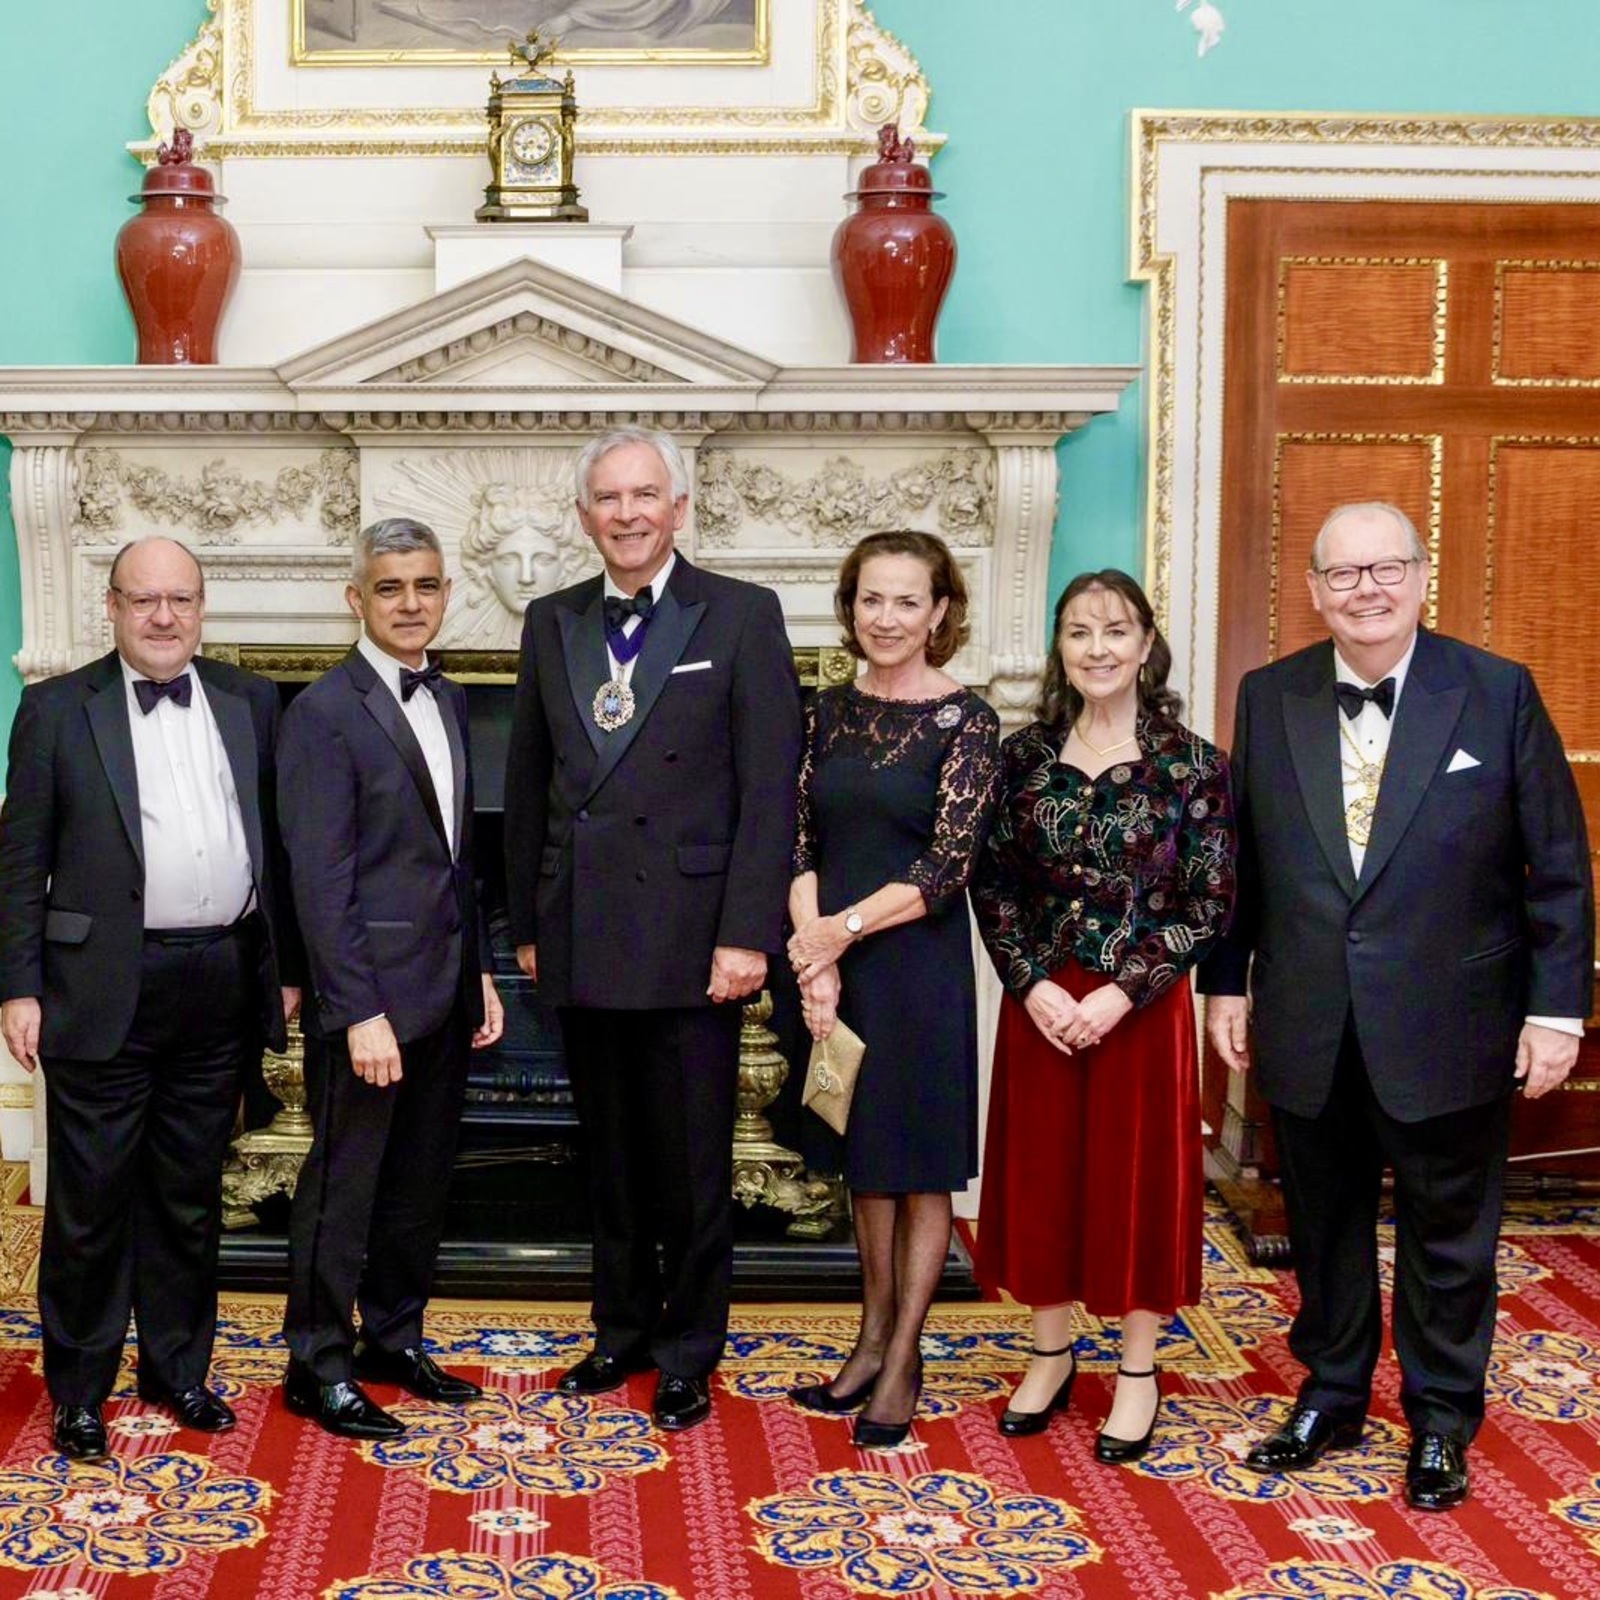 12 Jan 23 - Happy to attend the London Government Dinner at Mansion House with The Lord Mayor, the Mayor of London and the Policy Chair Chris Hayward.